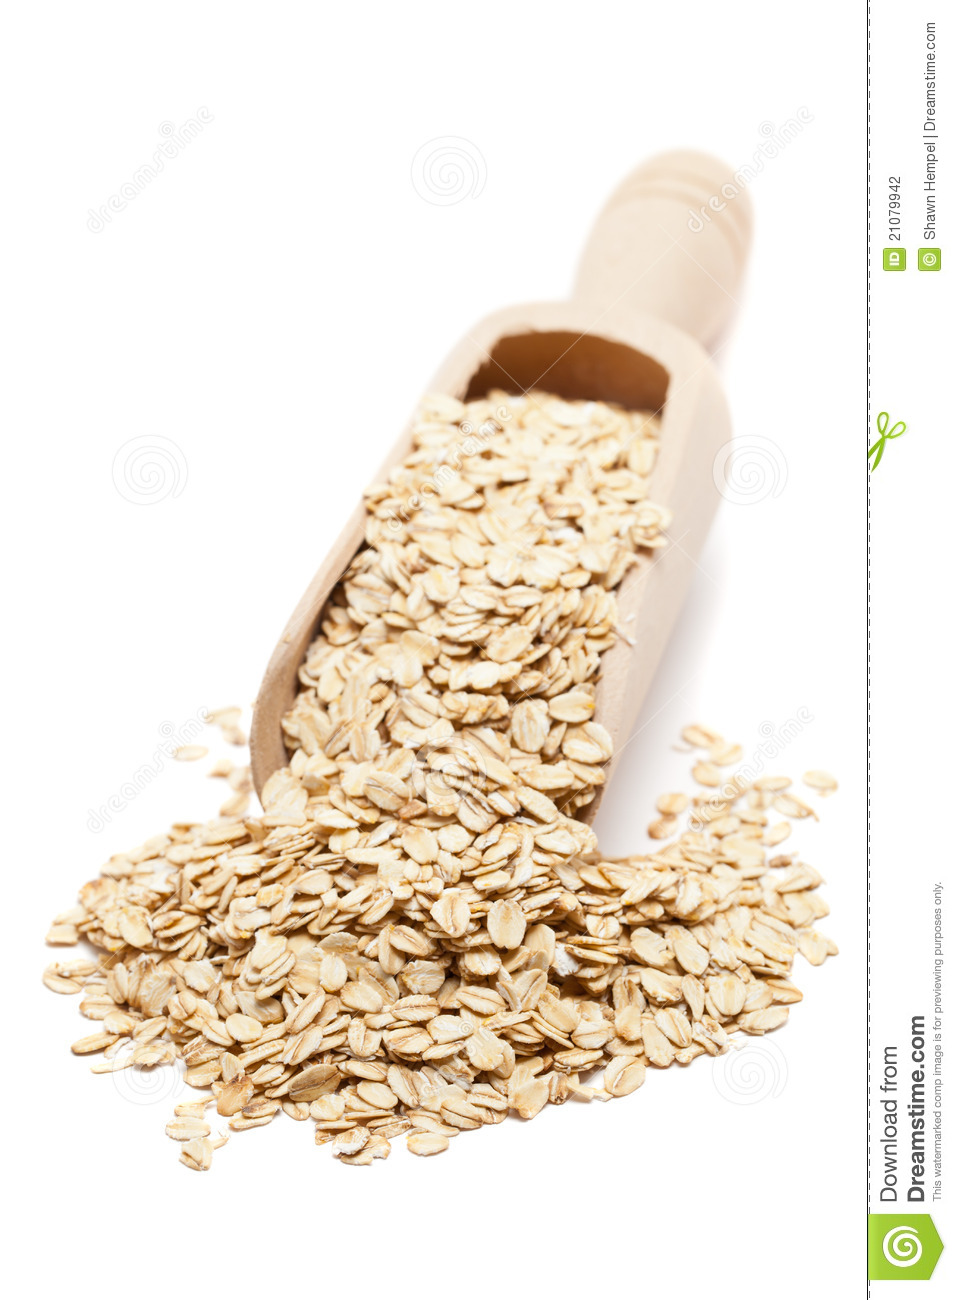 Oat Flakes In Wooden Scoop Isolated On White Background Mr No Pr No 3